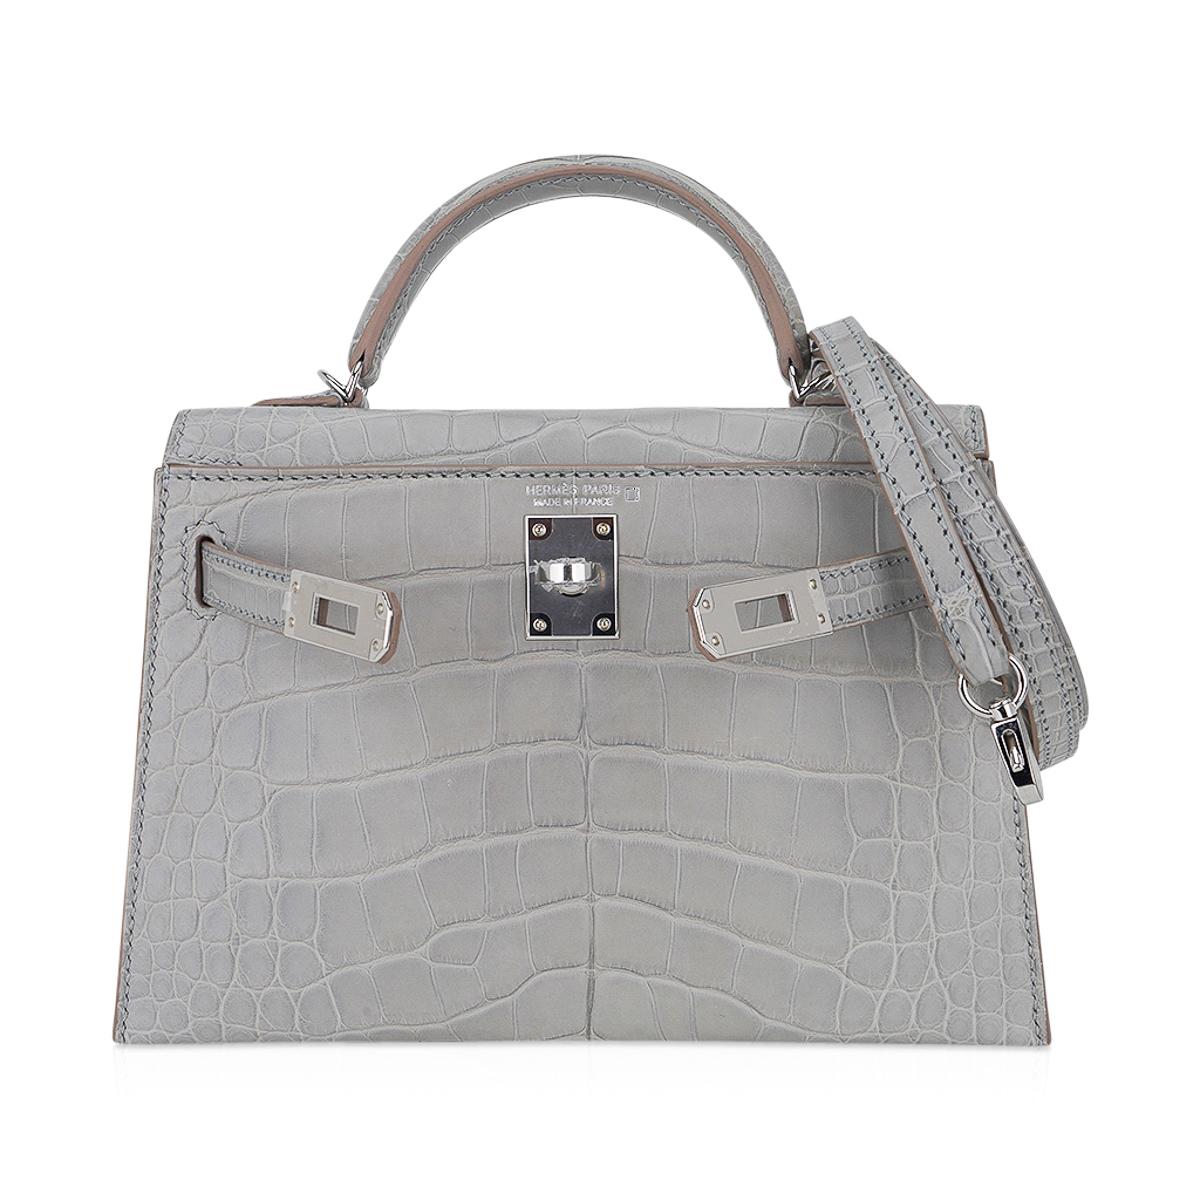 Hermes Kelly 20 Sellier Matte Gris Perle Alligator Mini Bag Palladium Hardware In New Condition For Sale In Miami, FL